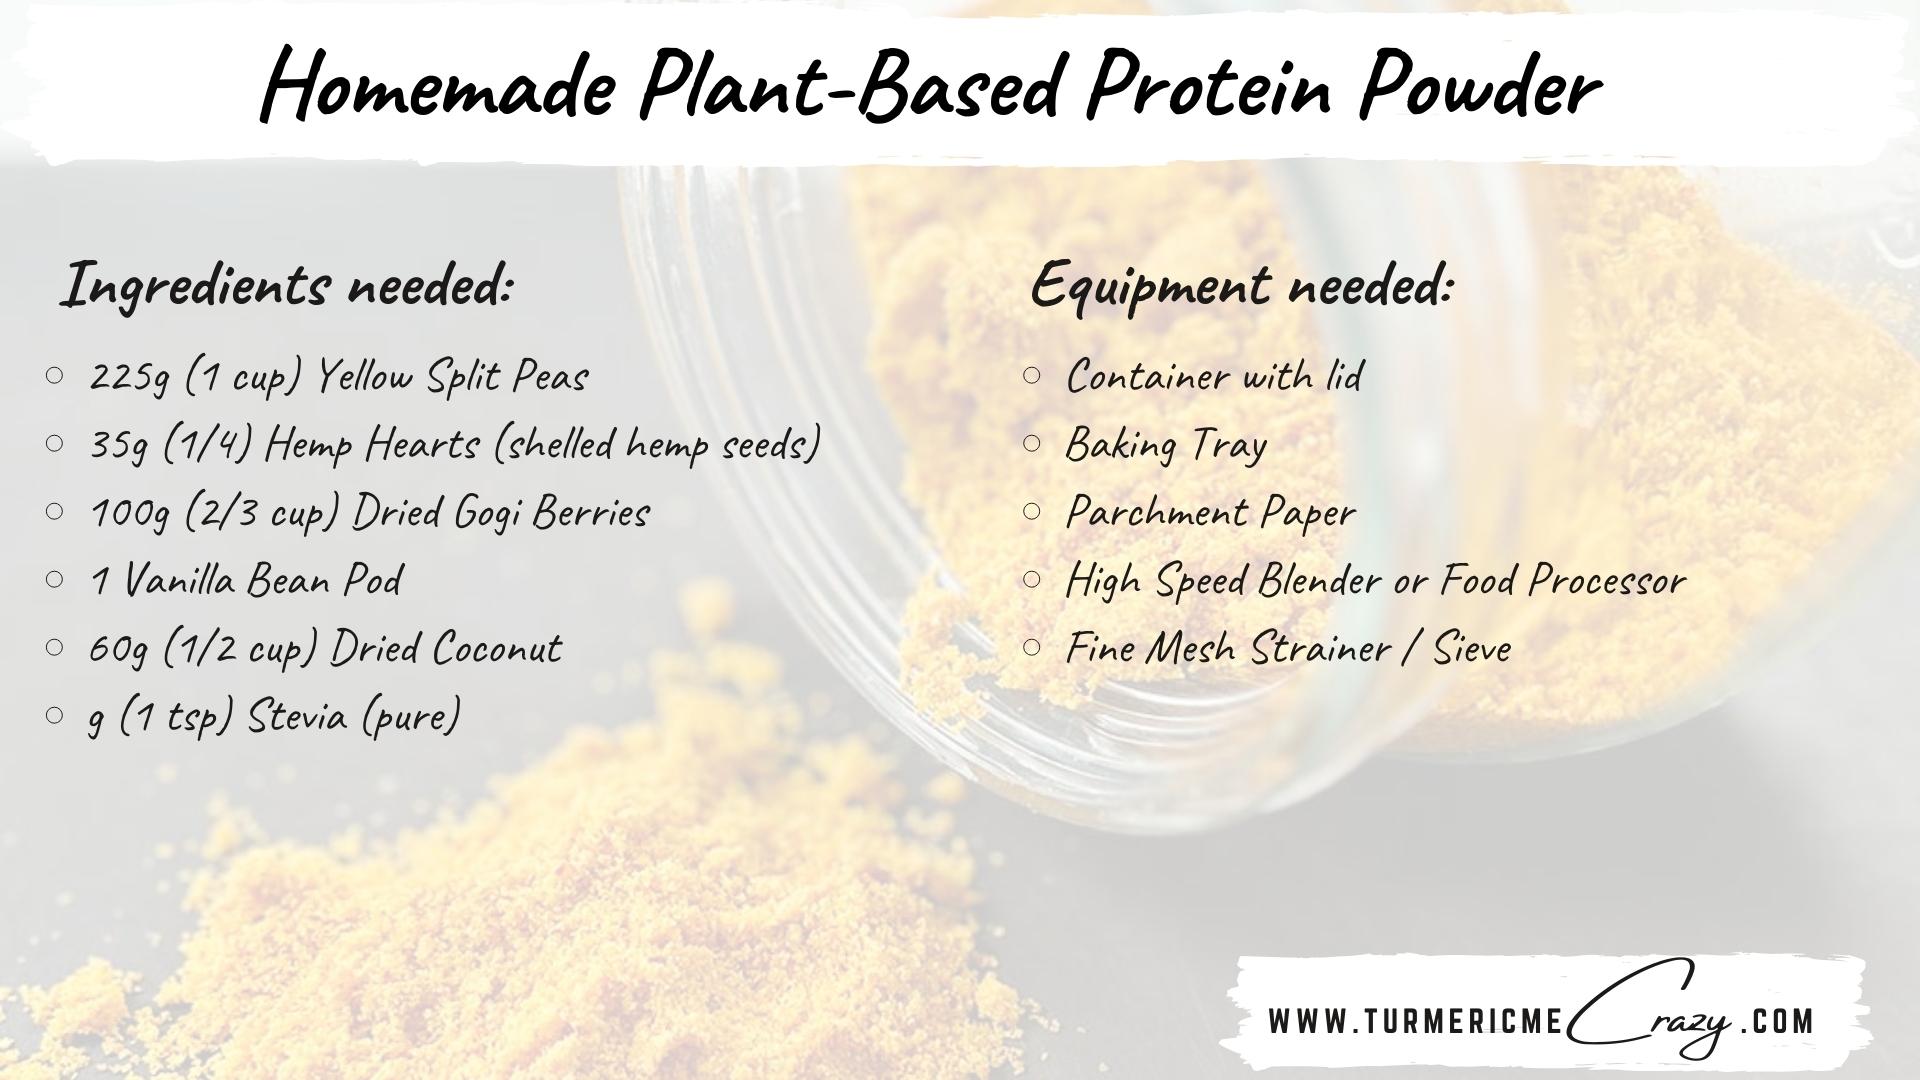 Stop spending crazy amounts on vegan protein powder and easily make your own! Bursting with flavour and full of goodness this plant-based protein powder is a must try for the whole family! With NO added sugars, sneak in some extra goodness into your families smoothies today! This incredibly delicious homemade protein powder is packed with nutrition and high in protein, dietary fiber, iron, vitamin A, Vitamin C and antioxidants! To top it off, it is incredibly delicious! Give it a try! I created this recipe to use the same healthful ingredients as the SUNWARRIOR brand - Warrior Blend. The ingredients in my homemade version have not been processed at all, therefore the pea protein includes the fiber (which I think is a good thing)! #homemadeproteinpowder #plantbasedprotein #peaprotein #veganproteinpowder #proteinpowder #plantbased #plantbaseddiet #homemadeprotein #plantbasediet #naturalprotein #veganrecipes #savemoney #plantbasedcooking #plantbasedfoods #plantbasedfamily #diyrecipes #glutenfreerecipes #glutenfreeliving #glutenanddairyfreerecipes #homemadepeaprotein